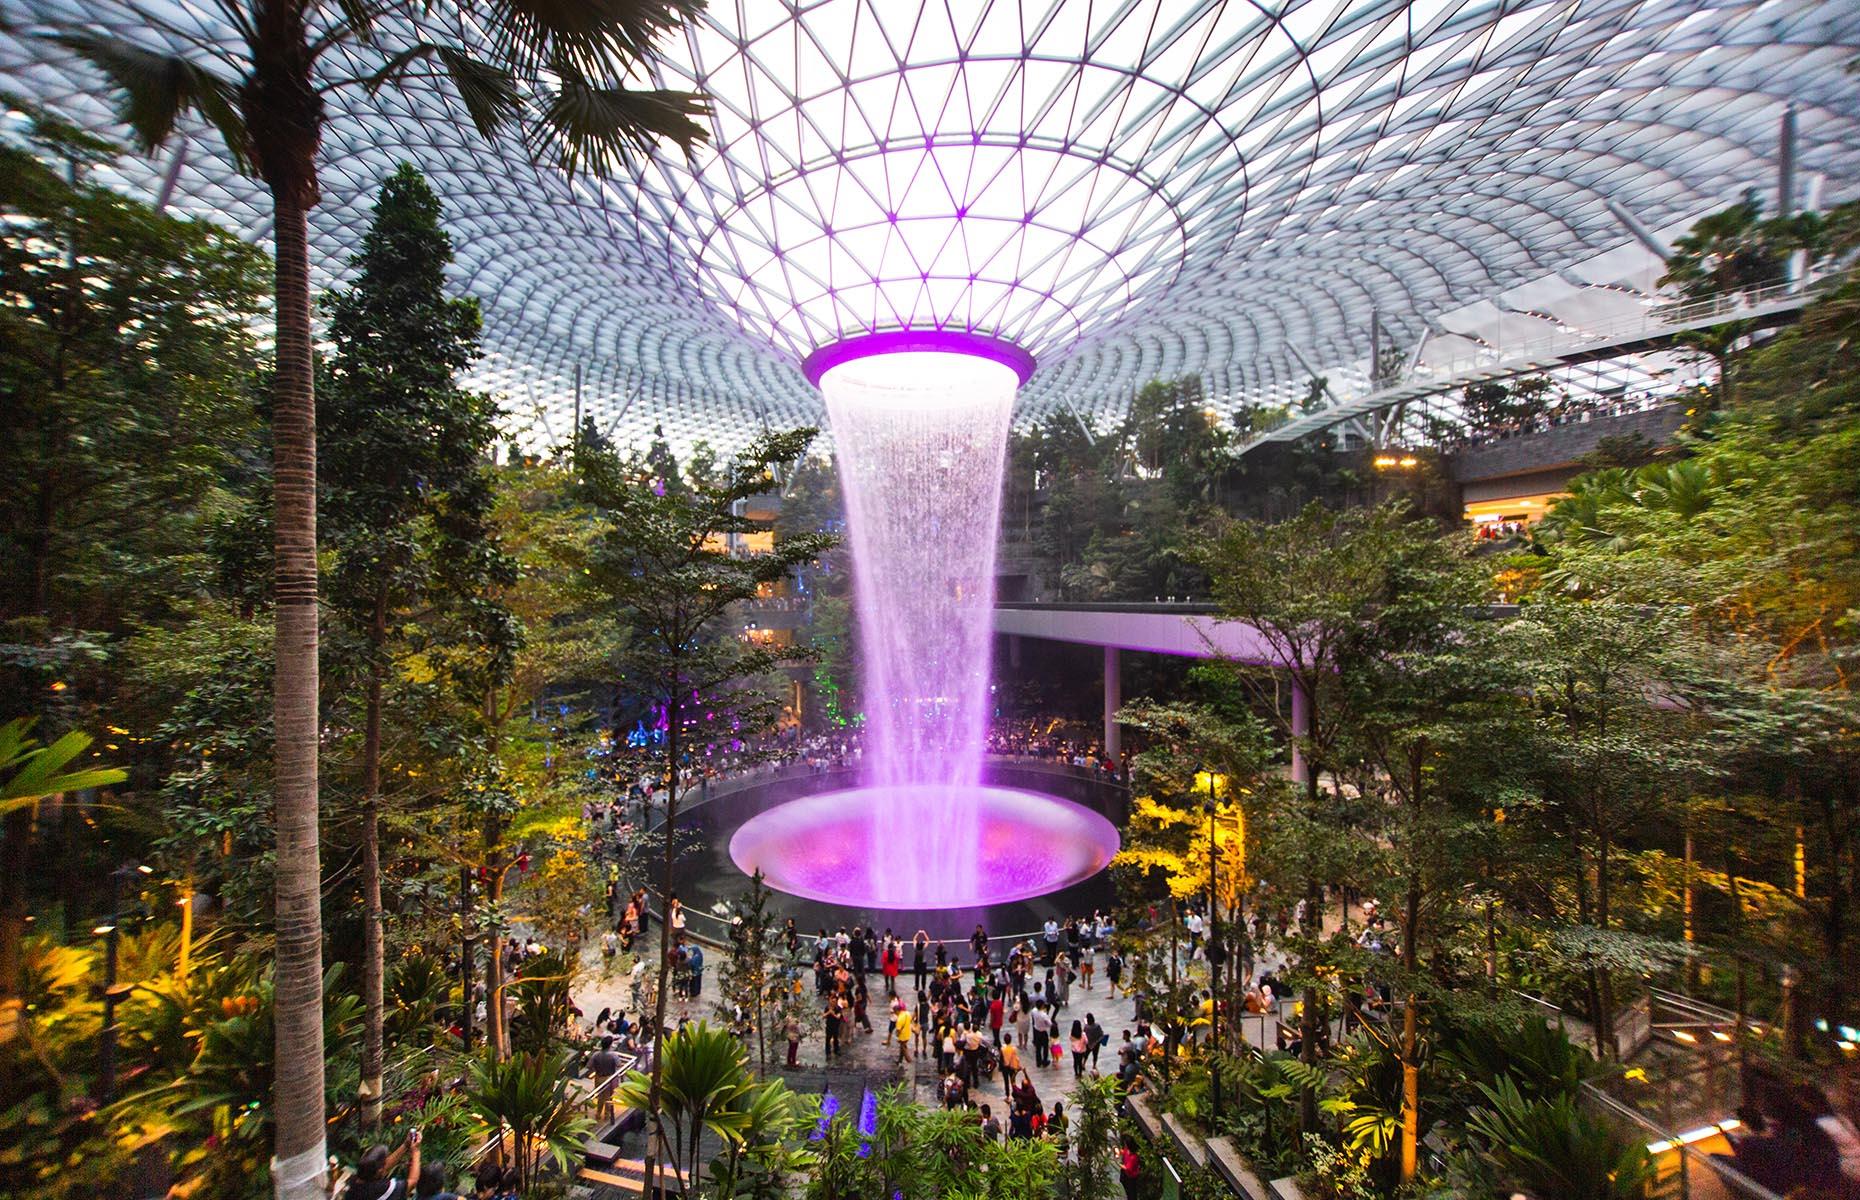 <p>It’s unusual to want to spend a whole lot of time at the airport on holiday, but the Jewel at Changi is a day out with a difference. Connected to the arrivals hall in Terminal 1 since 2019, this incredible nature-themed retail, dining and entertainment complex has to be seen to be believed. The first thing that will blow you away is the magnificent Rain Vortex, which stands at a whopping 131 feet (40m) and is the world’s tallest indoor waterfall. If you can tear yourself and your camera away from its unique lightshow, go wild in the hundreds of shops, while youngsters are equally catered for on the top floor, where two mazes, bouncing nets and giant slides await. It beats trailing around duty free, but don’t get distracted and miss your flight!</p>